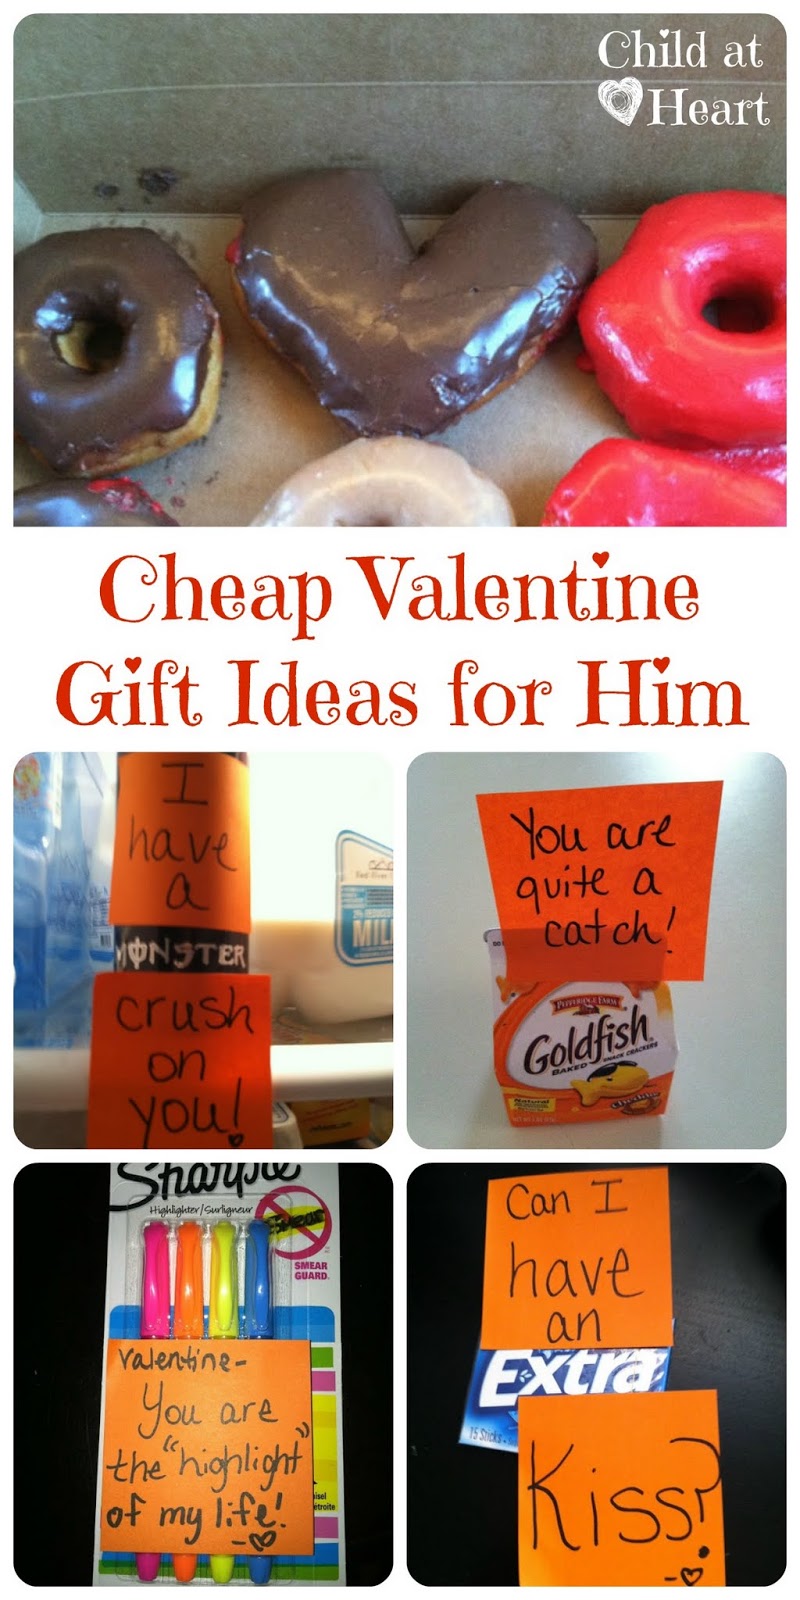 Cheap Valentine Gift Ideas for Him